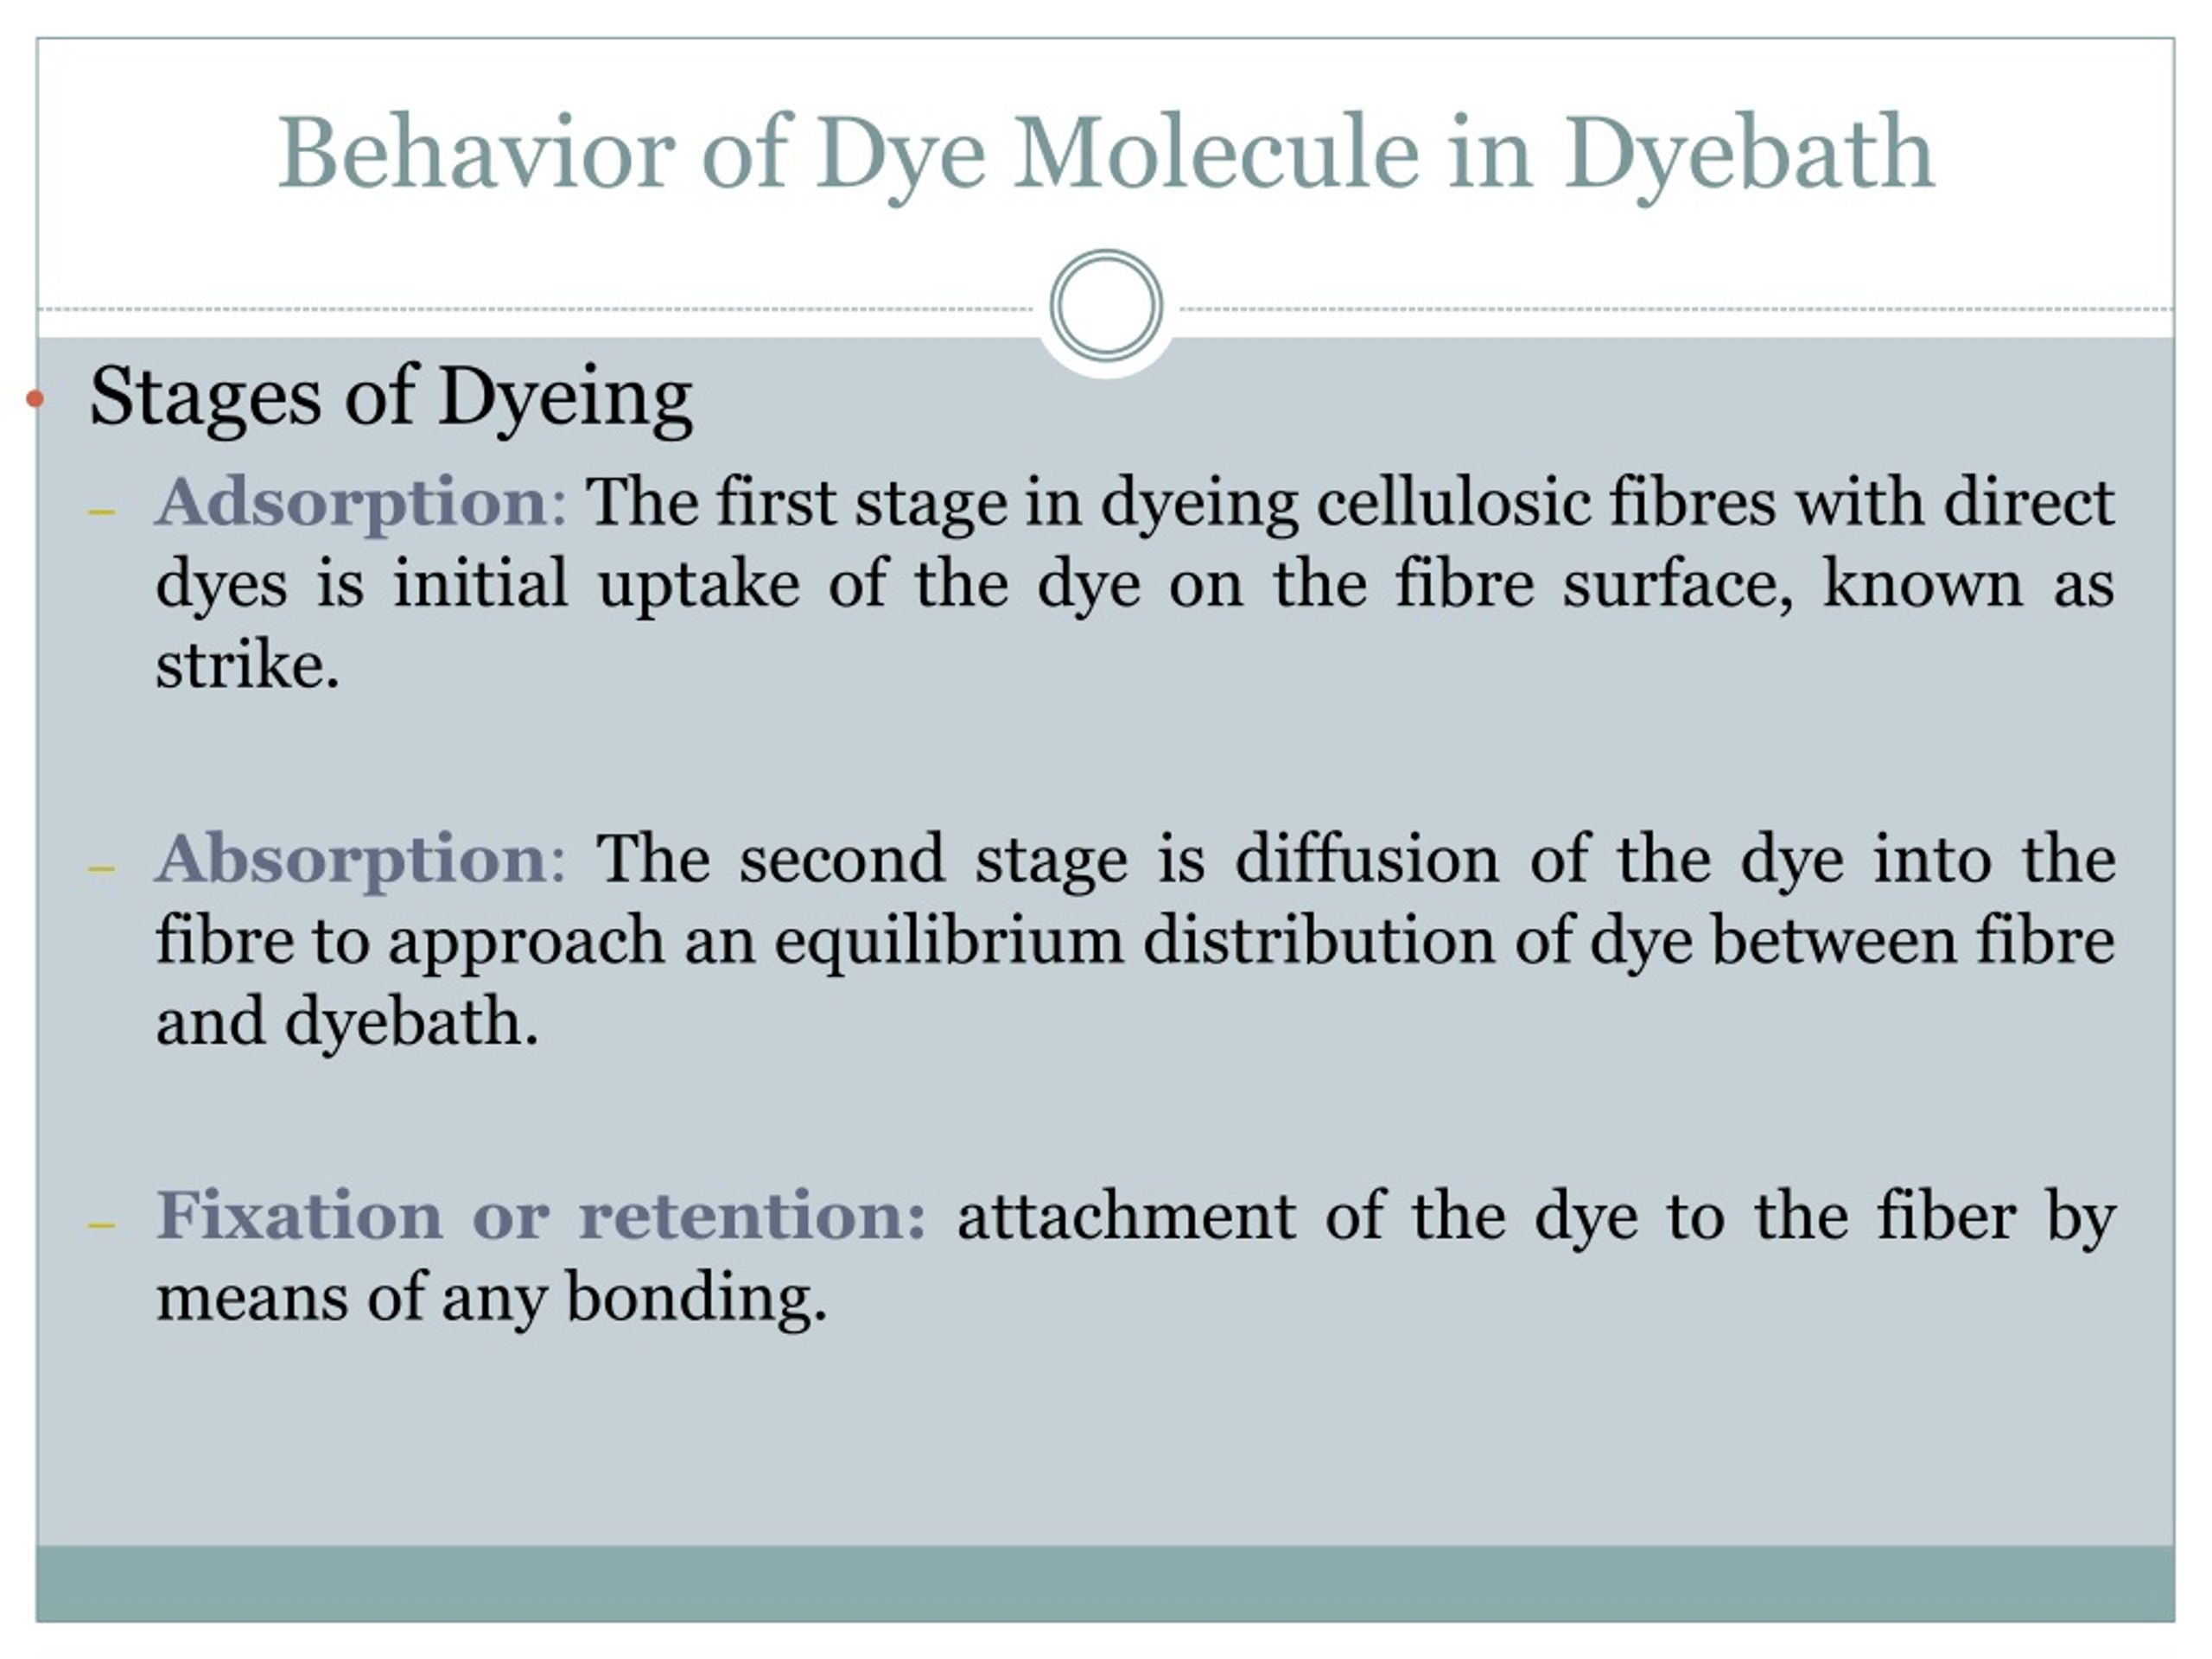 Stages of dyeing